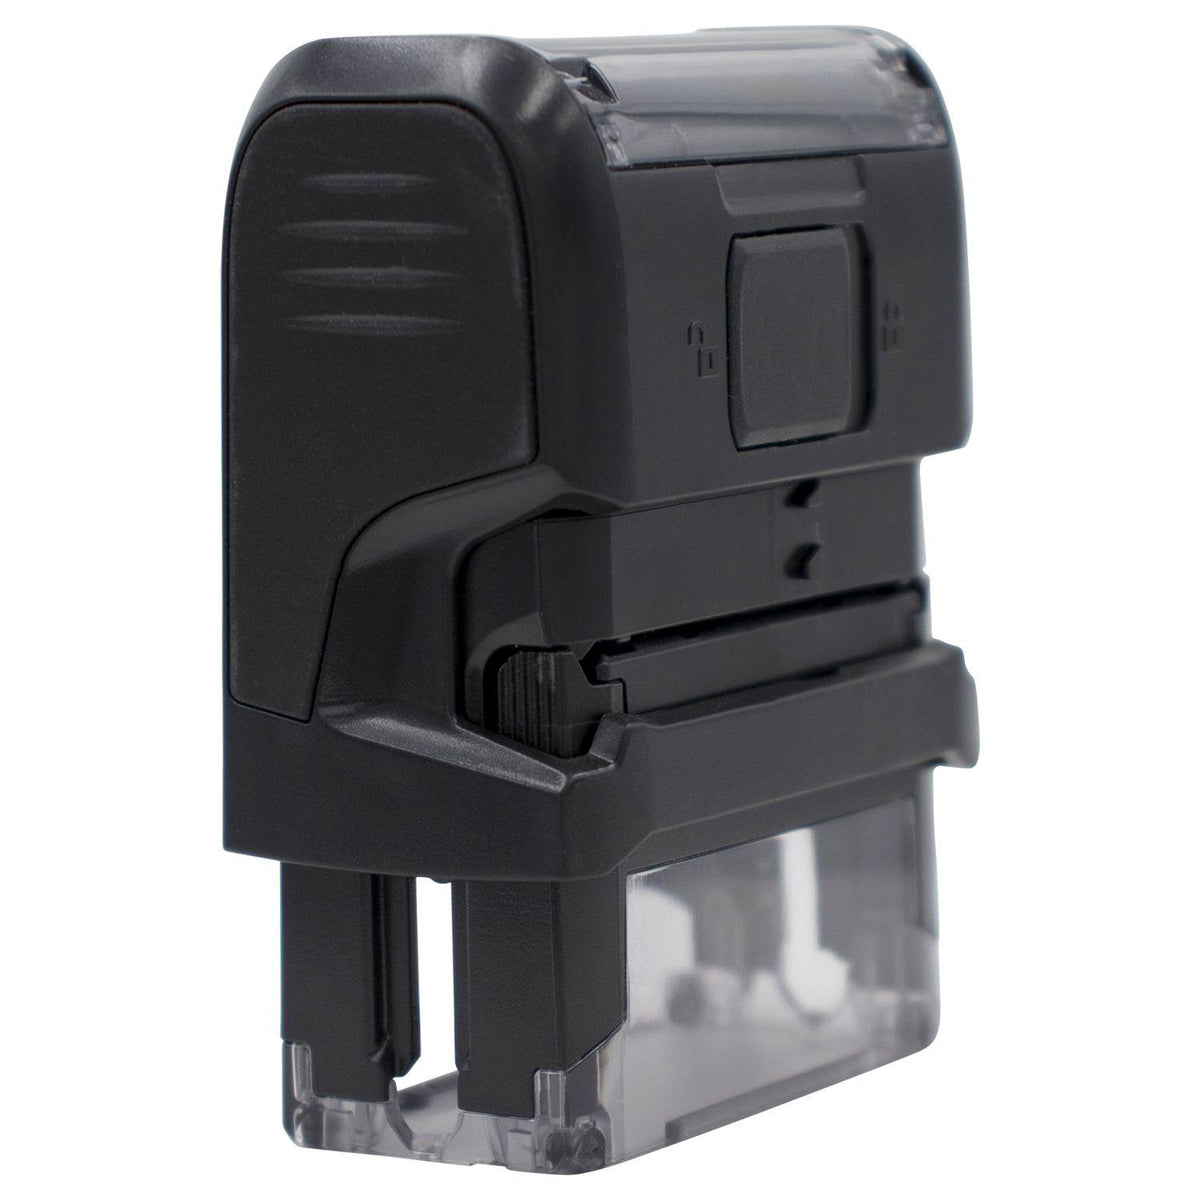 Large Self Inking Pta Stamp - Engineer Seal Stamps - Brand_Trodat, Impression Size_Large, Stamp Type_Self-Inking Stamp, Type of Use_Medical Office, Type of Use_Teacher